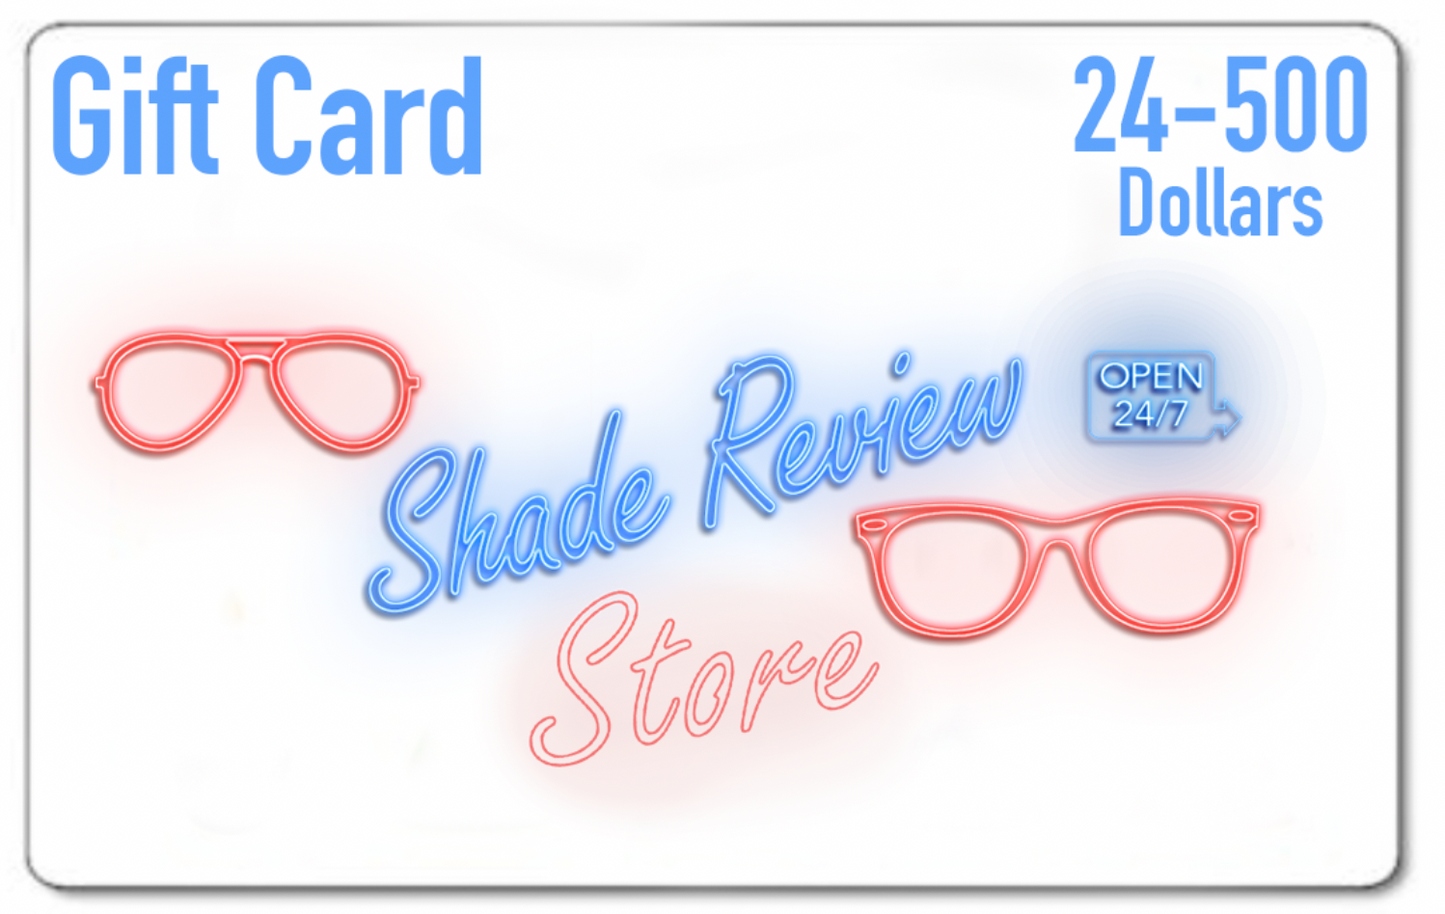 Shade Review Store Gift Card